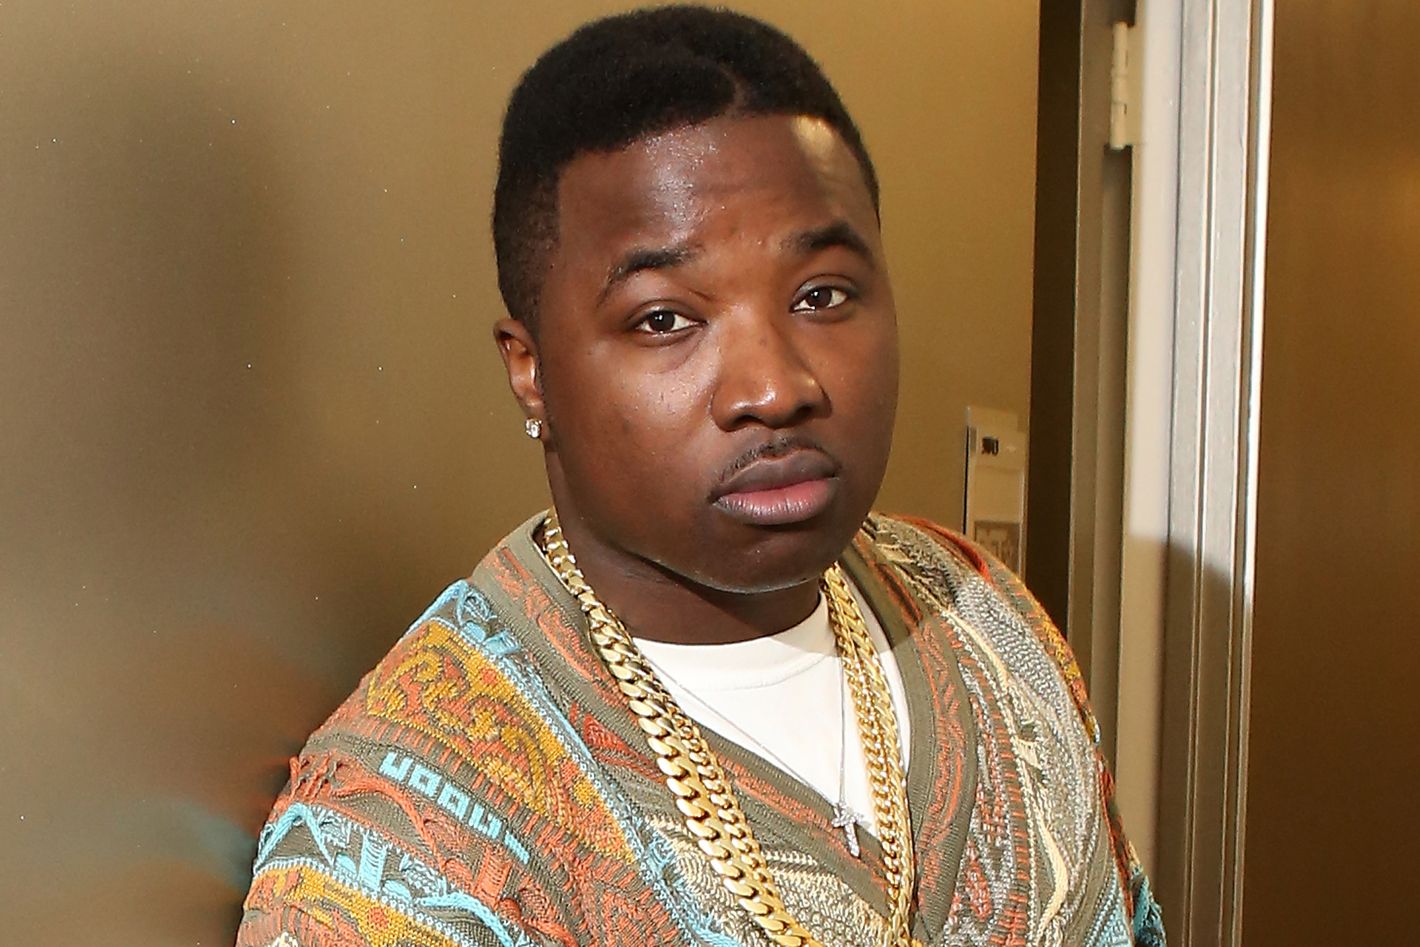 The 36-year old son of father (?) and mother(?) Troy Ave in 2022 photo. Troy Ave earned a  million dollar salary - leaving the net worth at  million in 2022